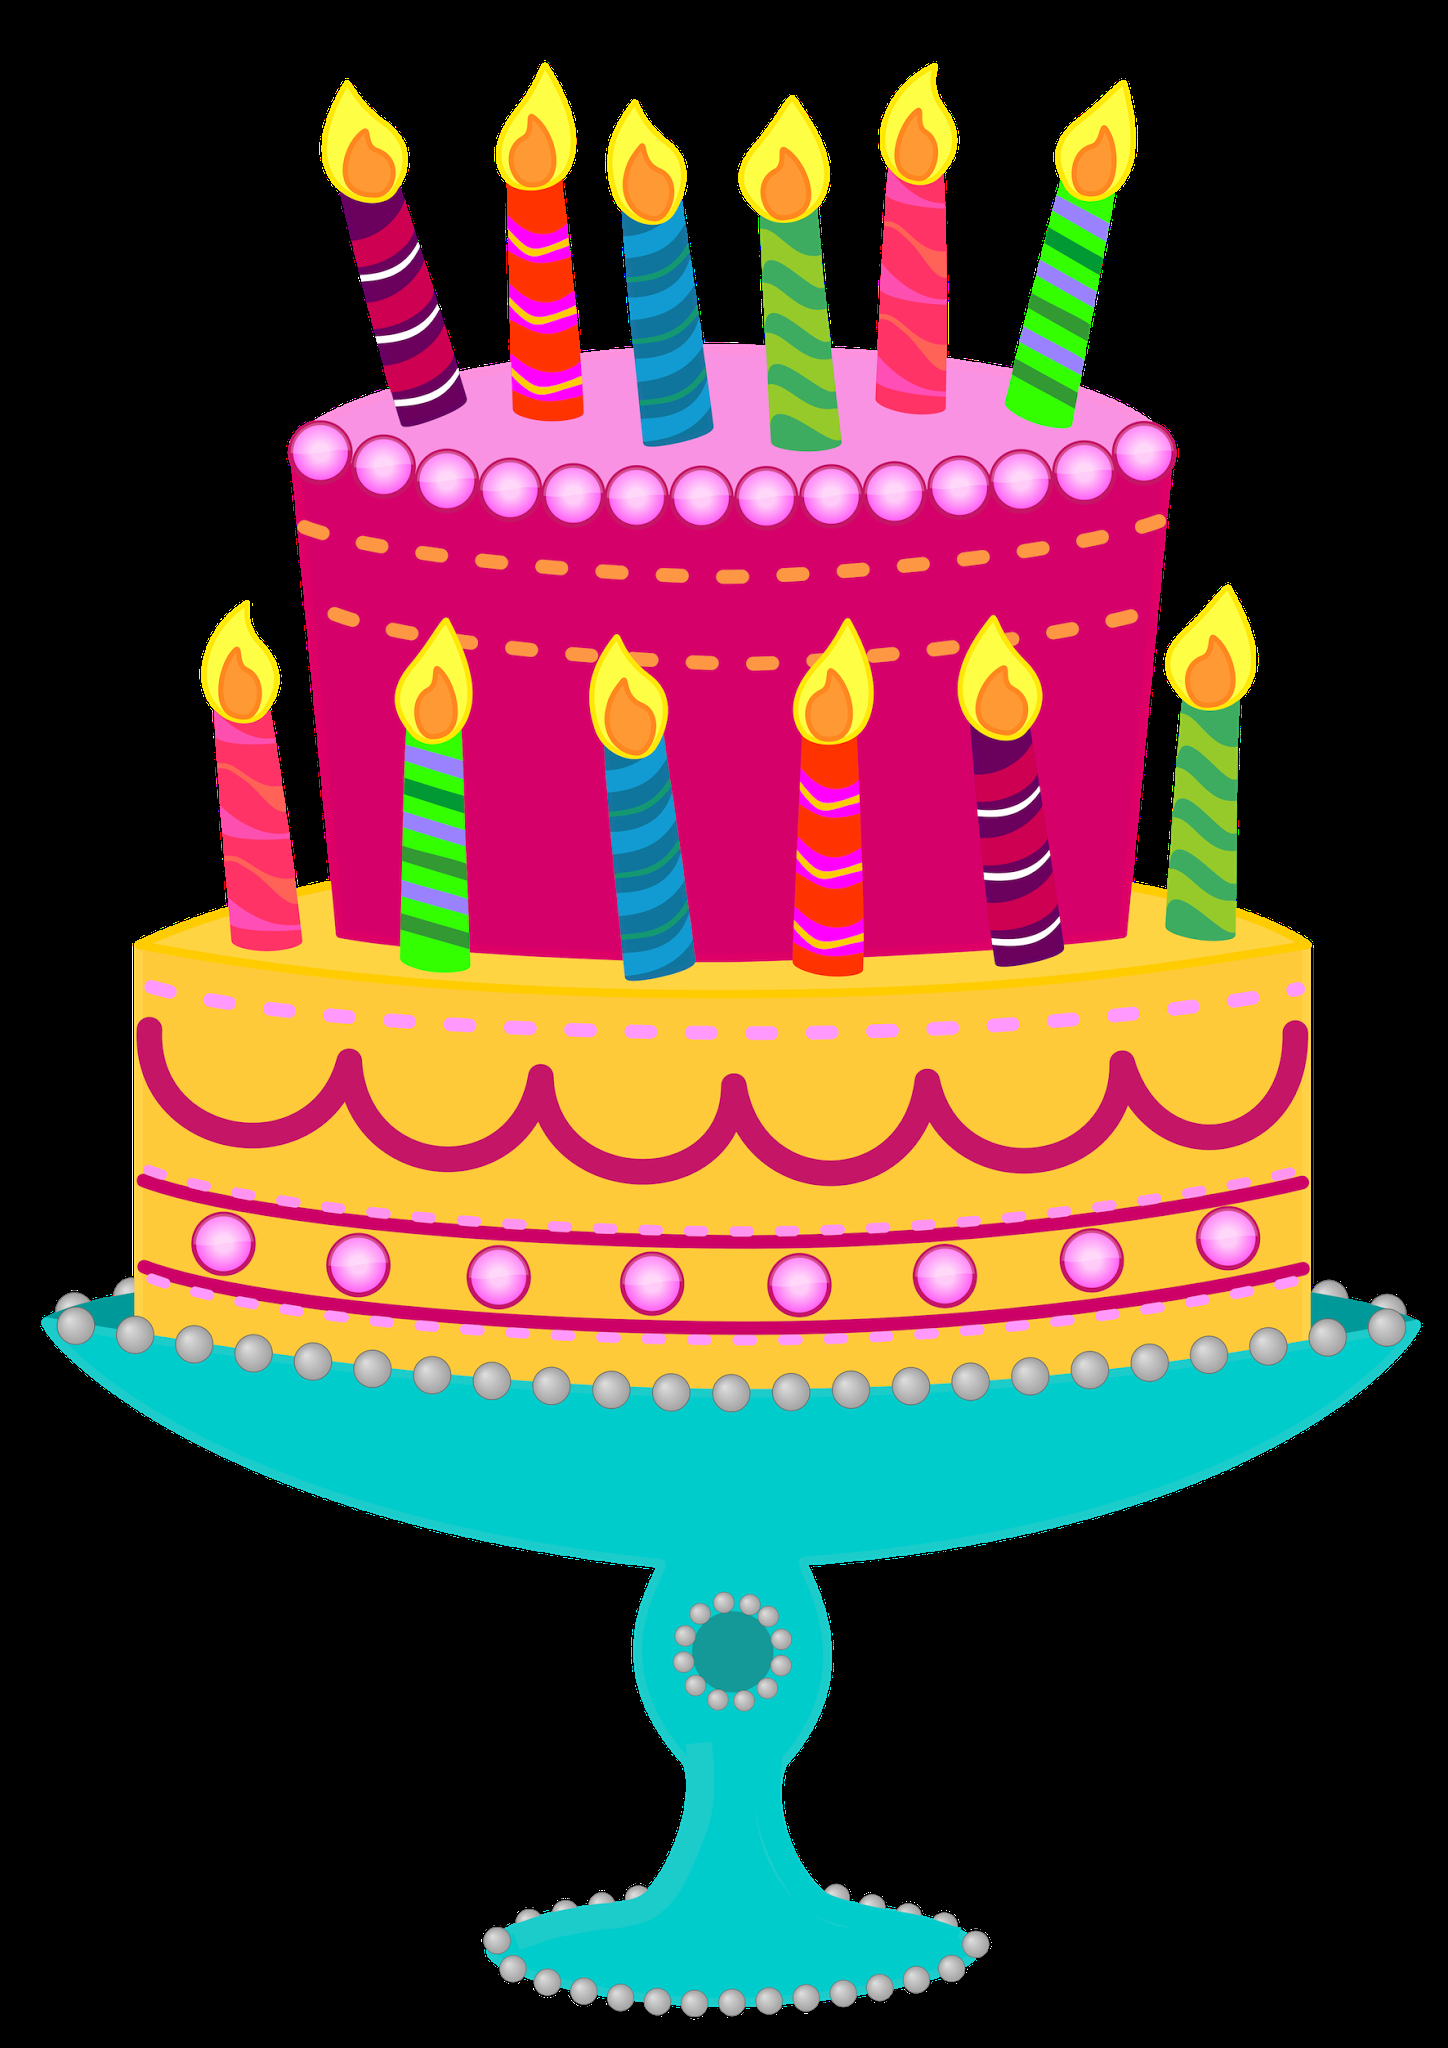 Free Pictures Of Birthday Cakes Free Cake Images Clipartsco Paper Images Birthday Birthday